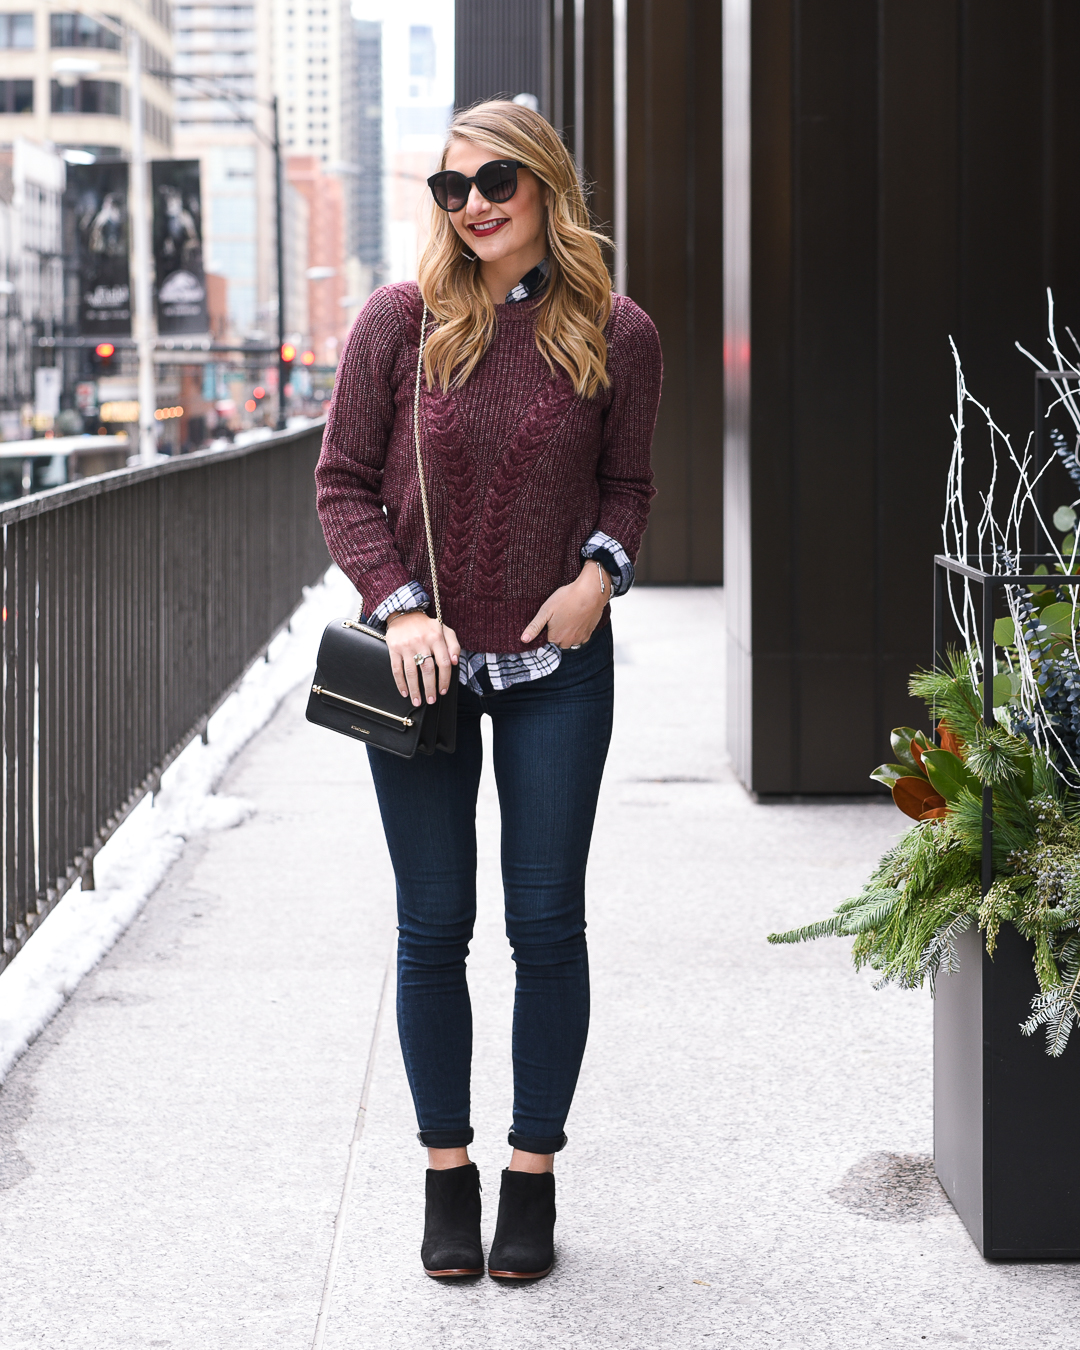 best abercrombie and fitch sweaters for under $50 - Best Cute Affordable Sweater for Layering by Chicago style blogger Visions of Vogue